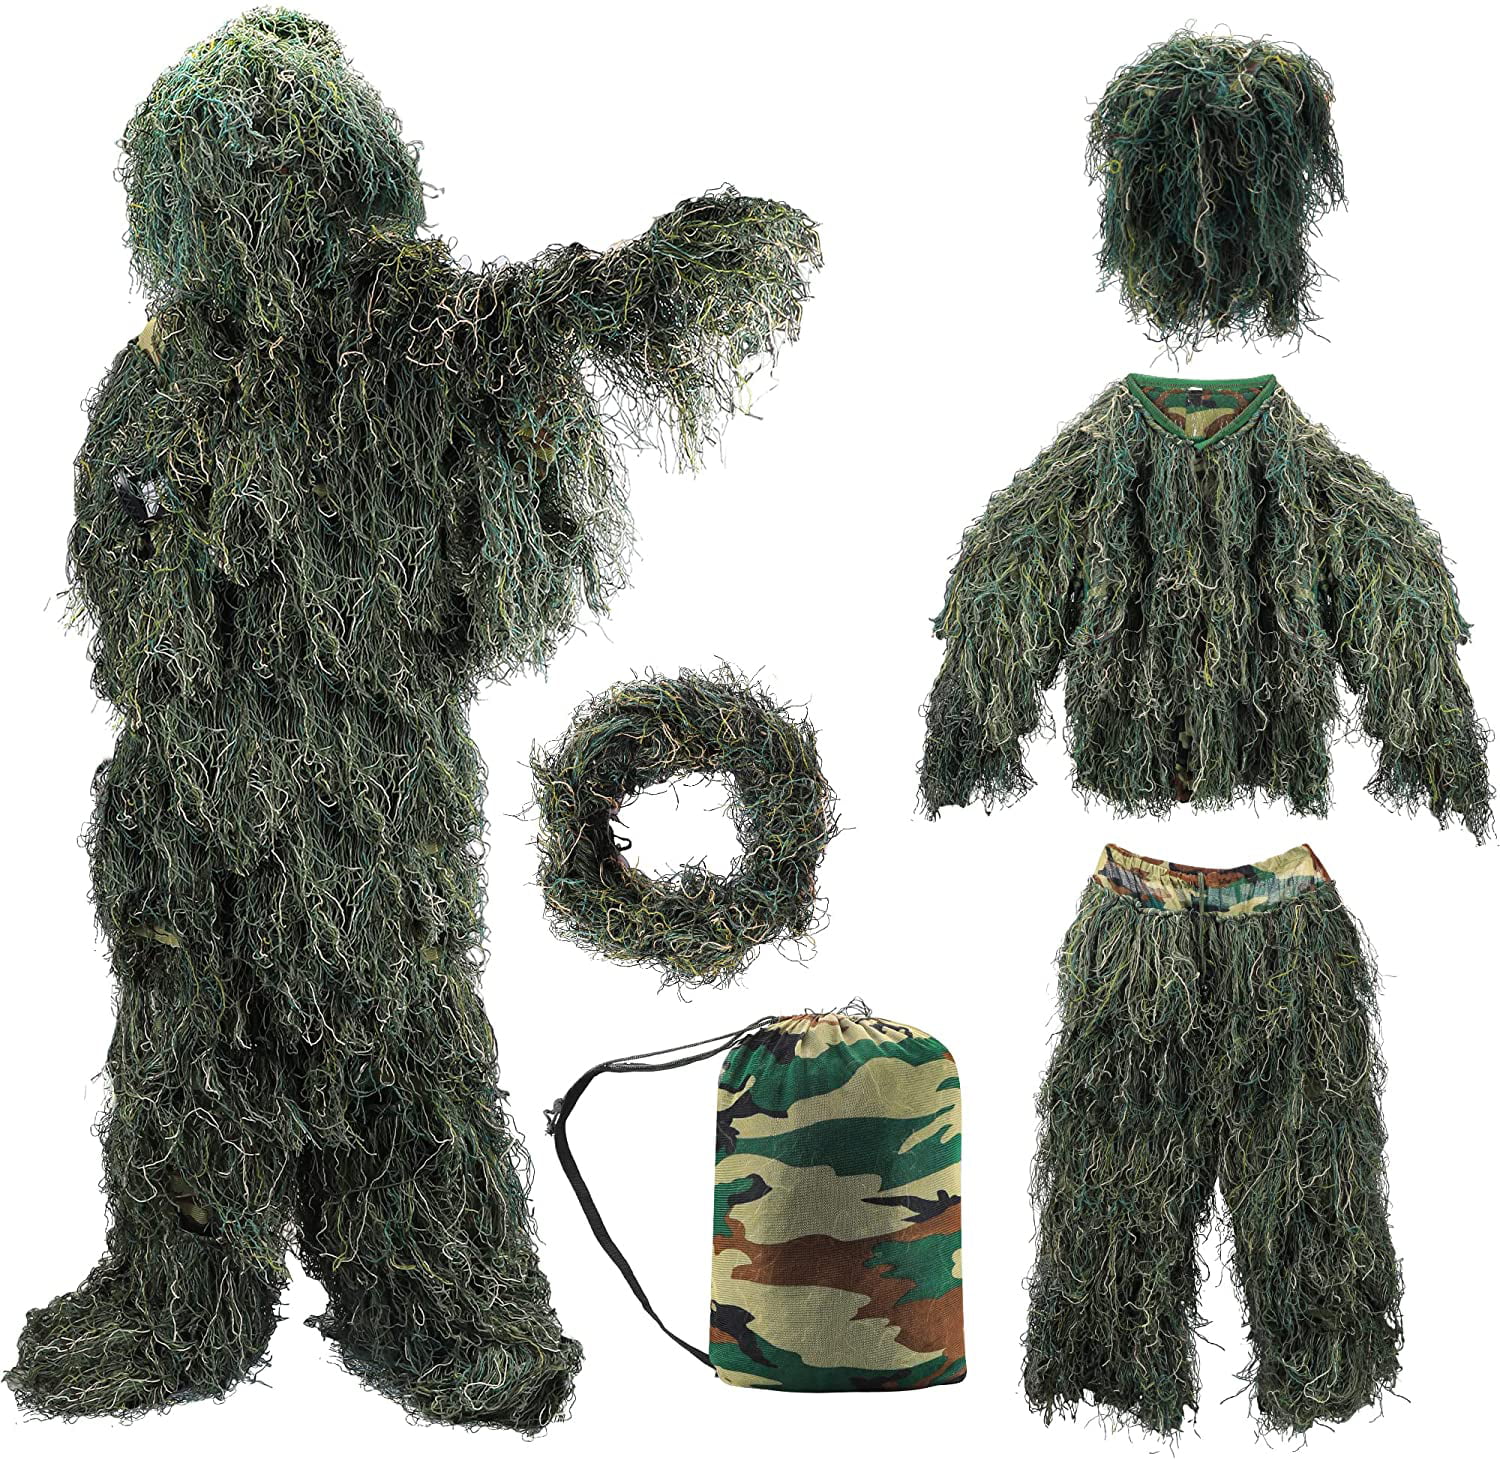 Winter Snow Ghillie Suit High Quality Camouflage Waterproof Hunting Jacket Pants